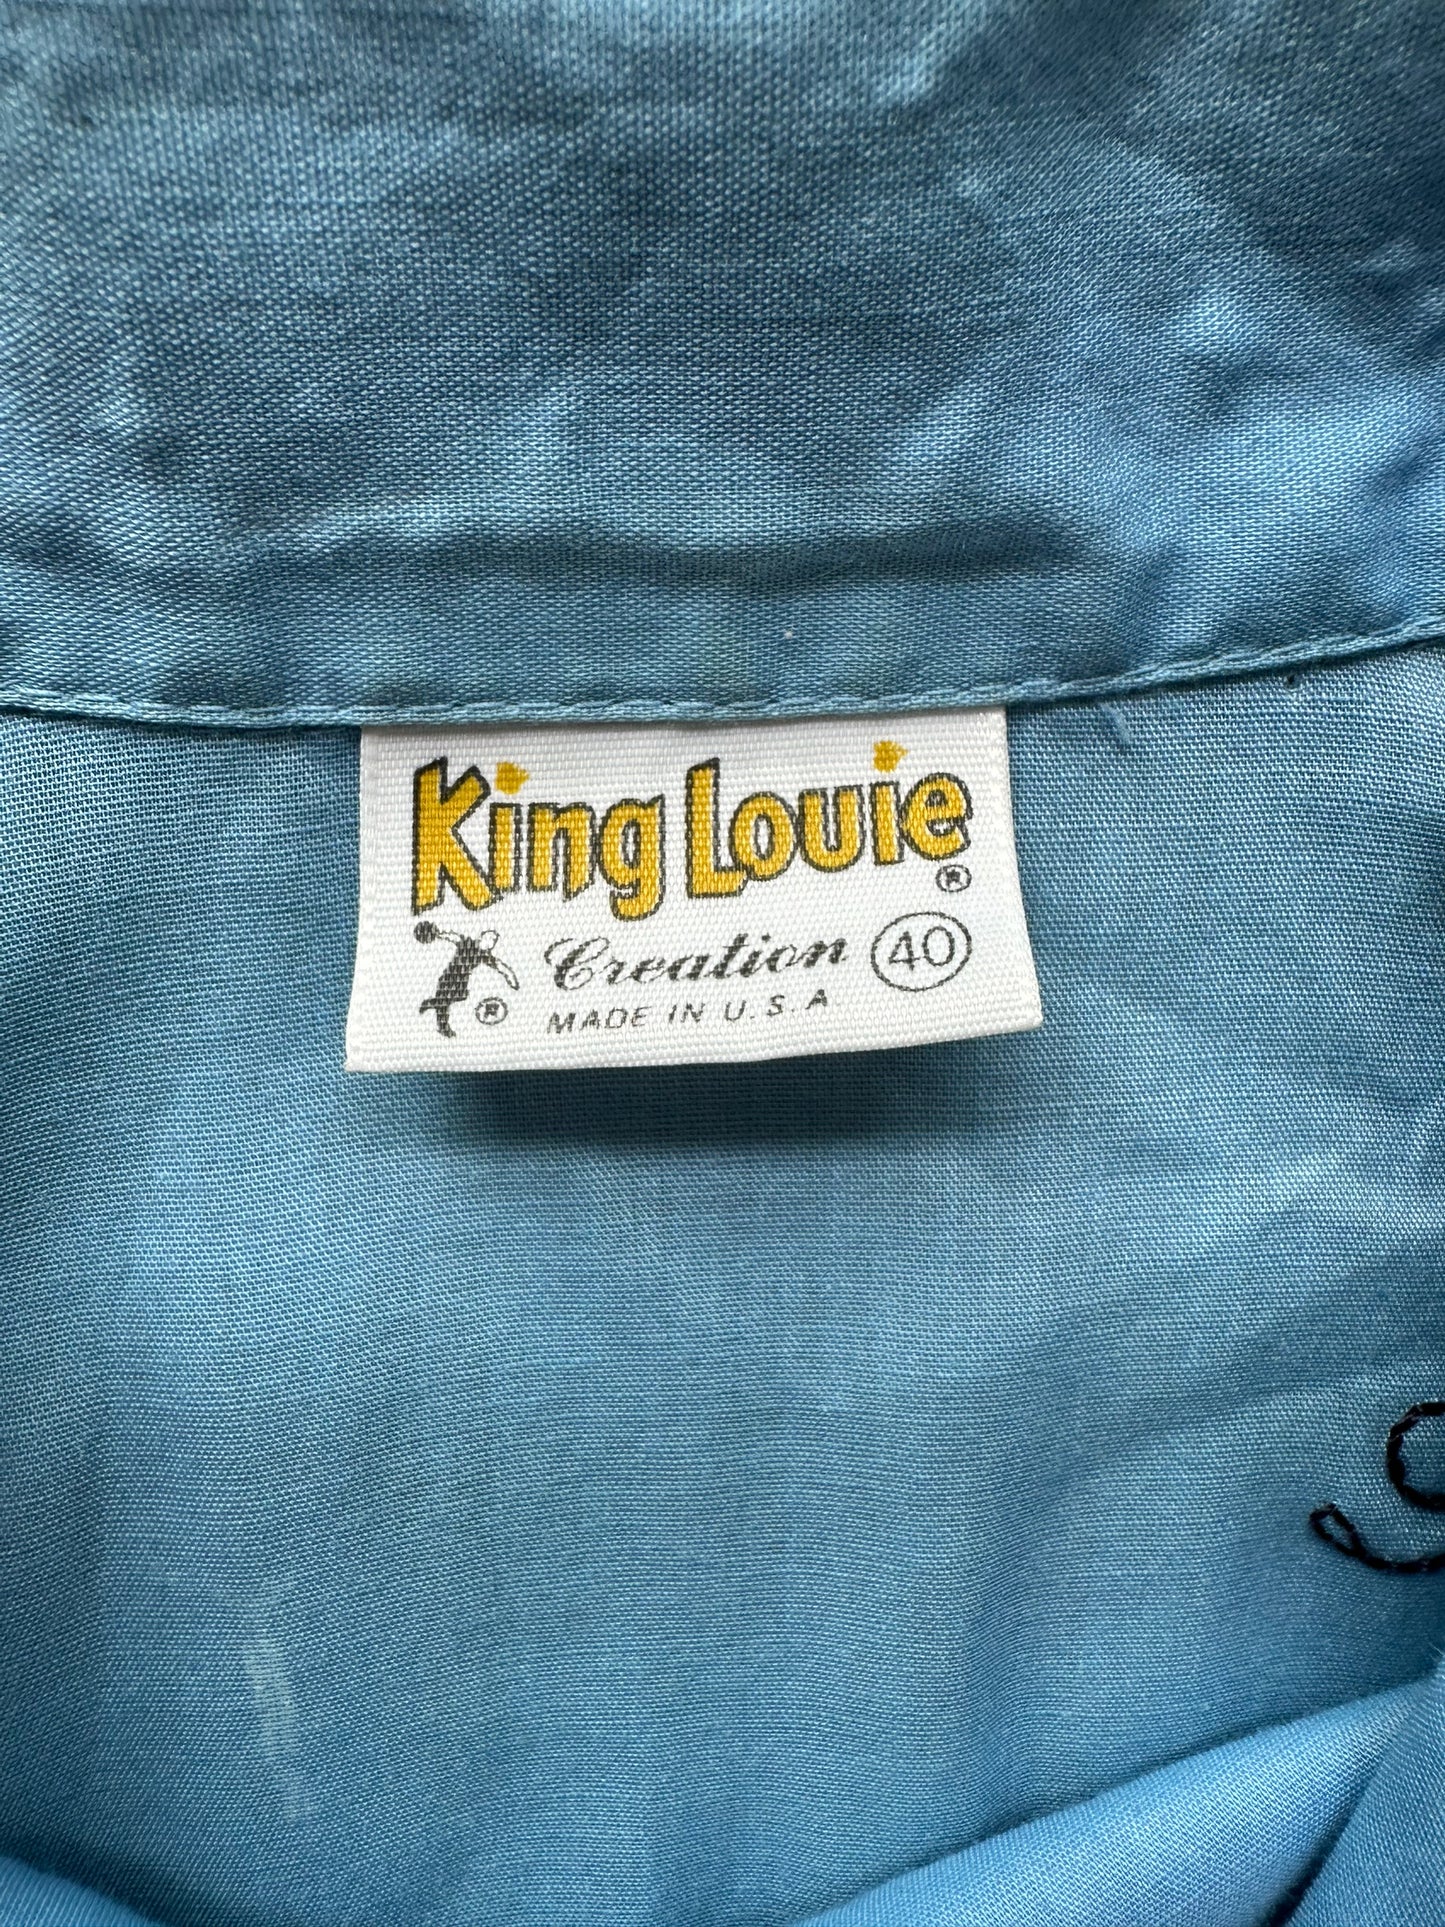 Tag of Vintage "New Frontier Lanes" Chainstitched Bowling Shirt SZ 40 | Vintage Bowling Shirt Seattle | Barn Owl Vintage Seattle